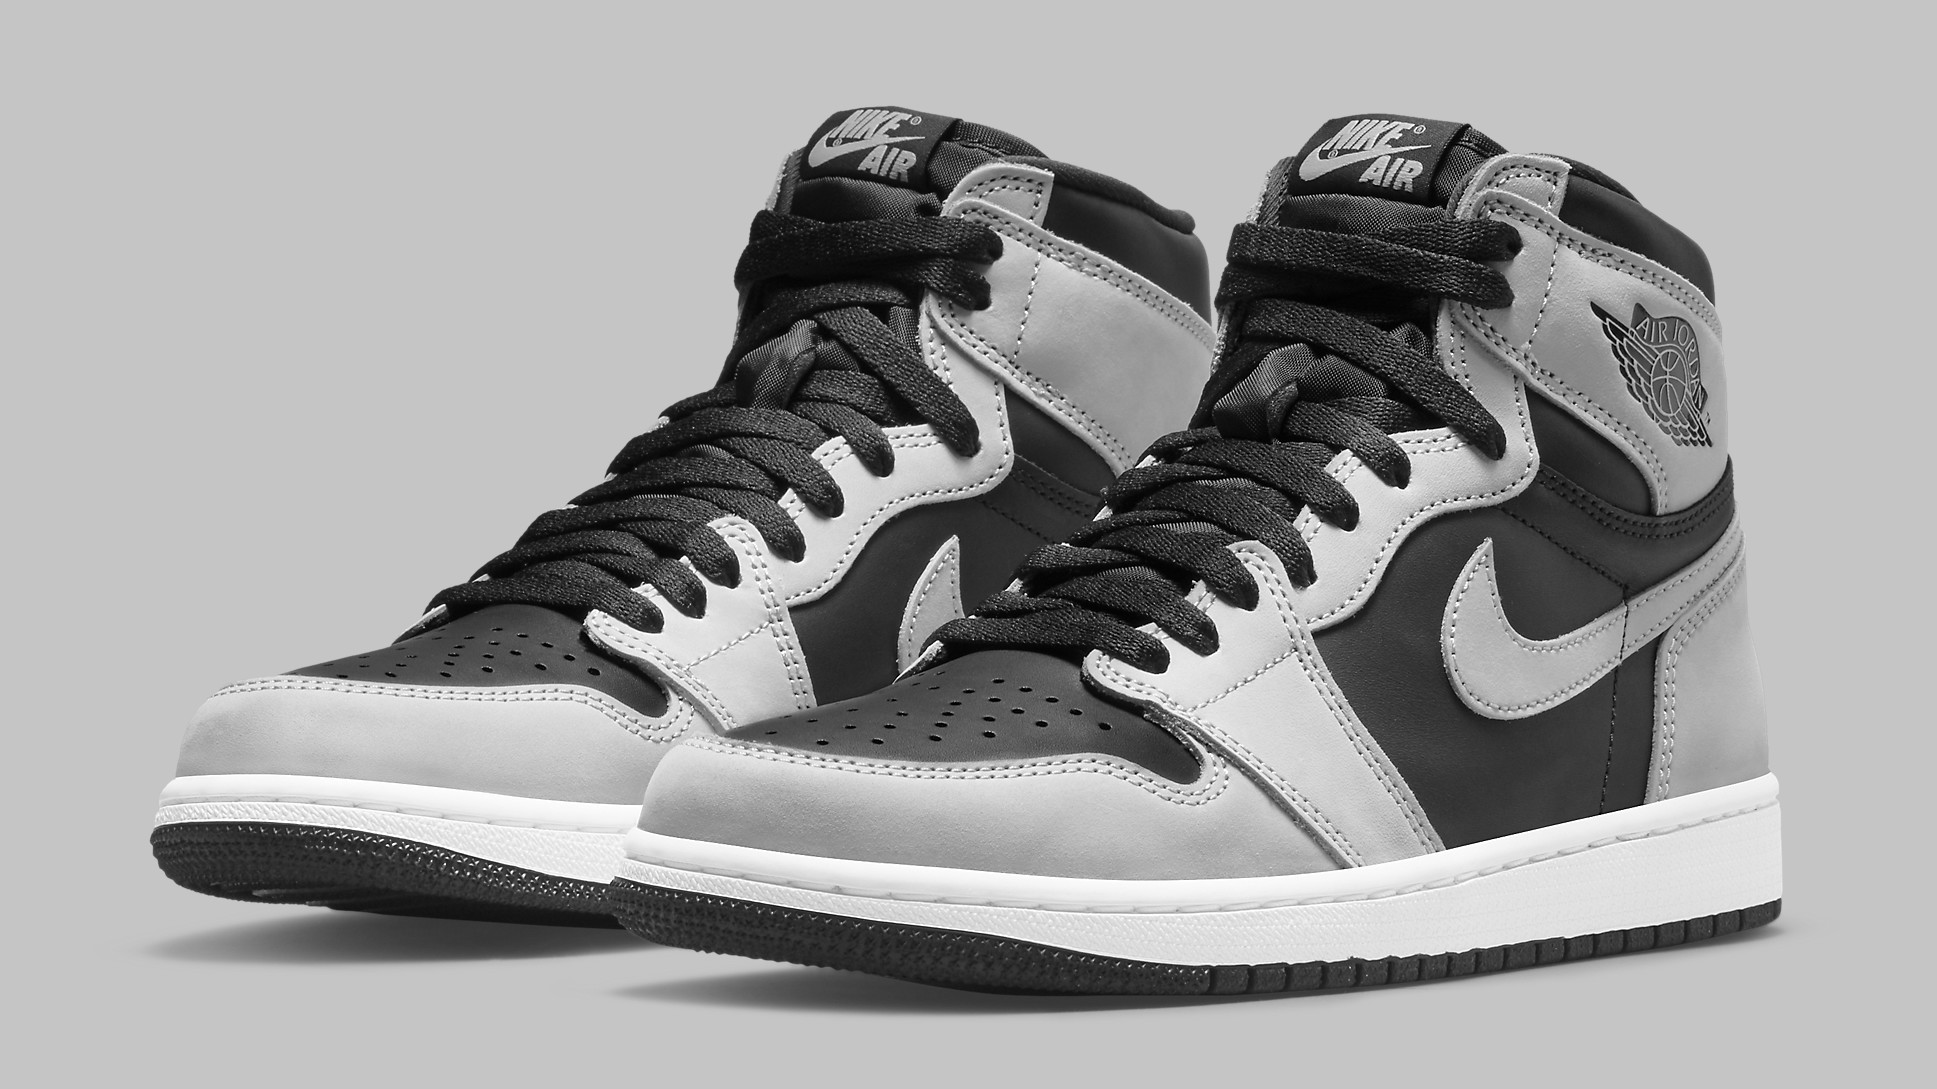 Shadow 2.0' Air Jordan 1 High Is Releasing This Month | Complex